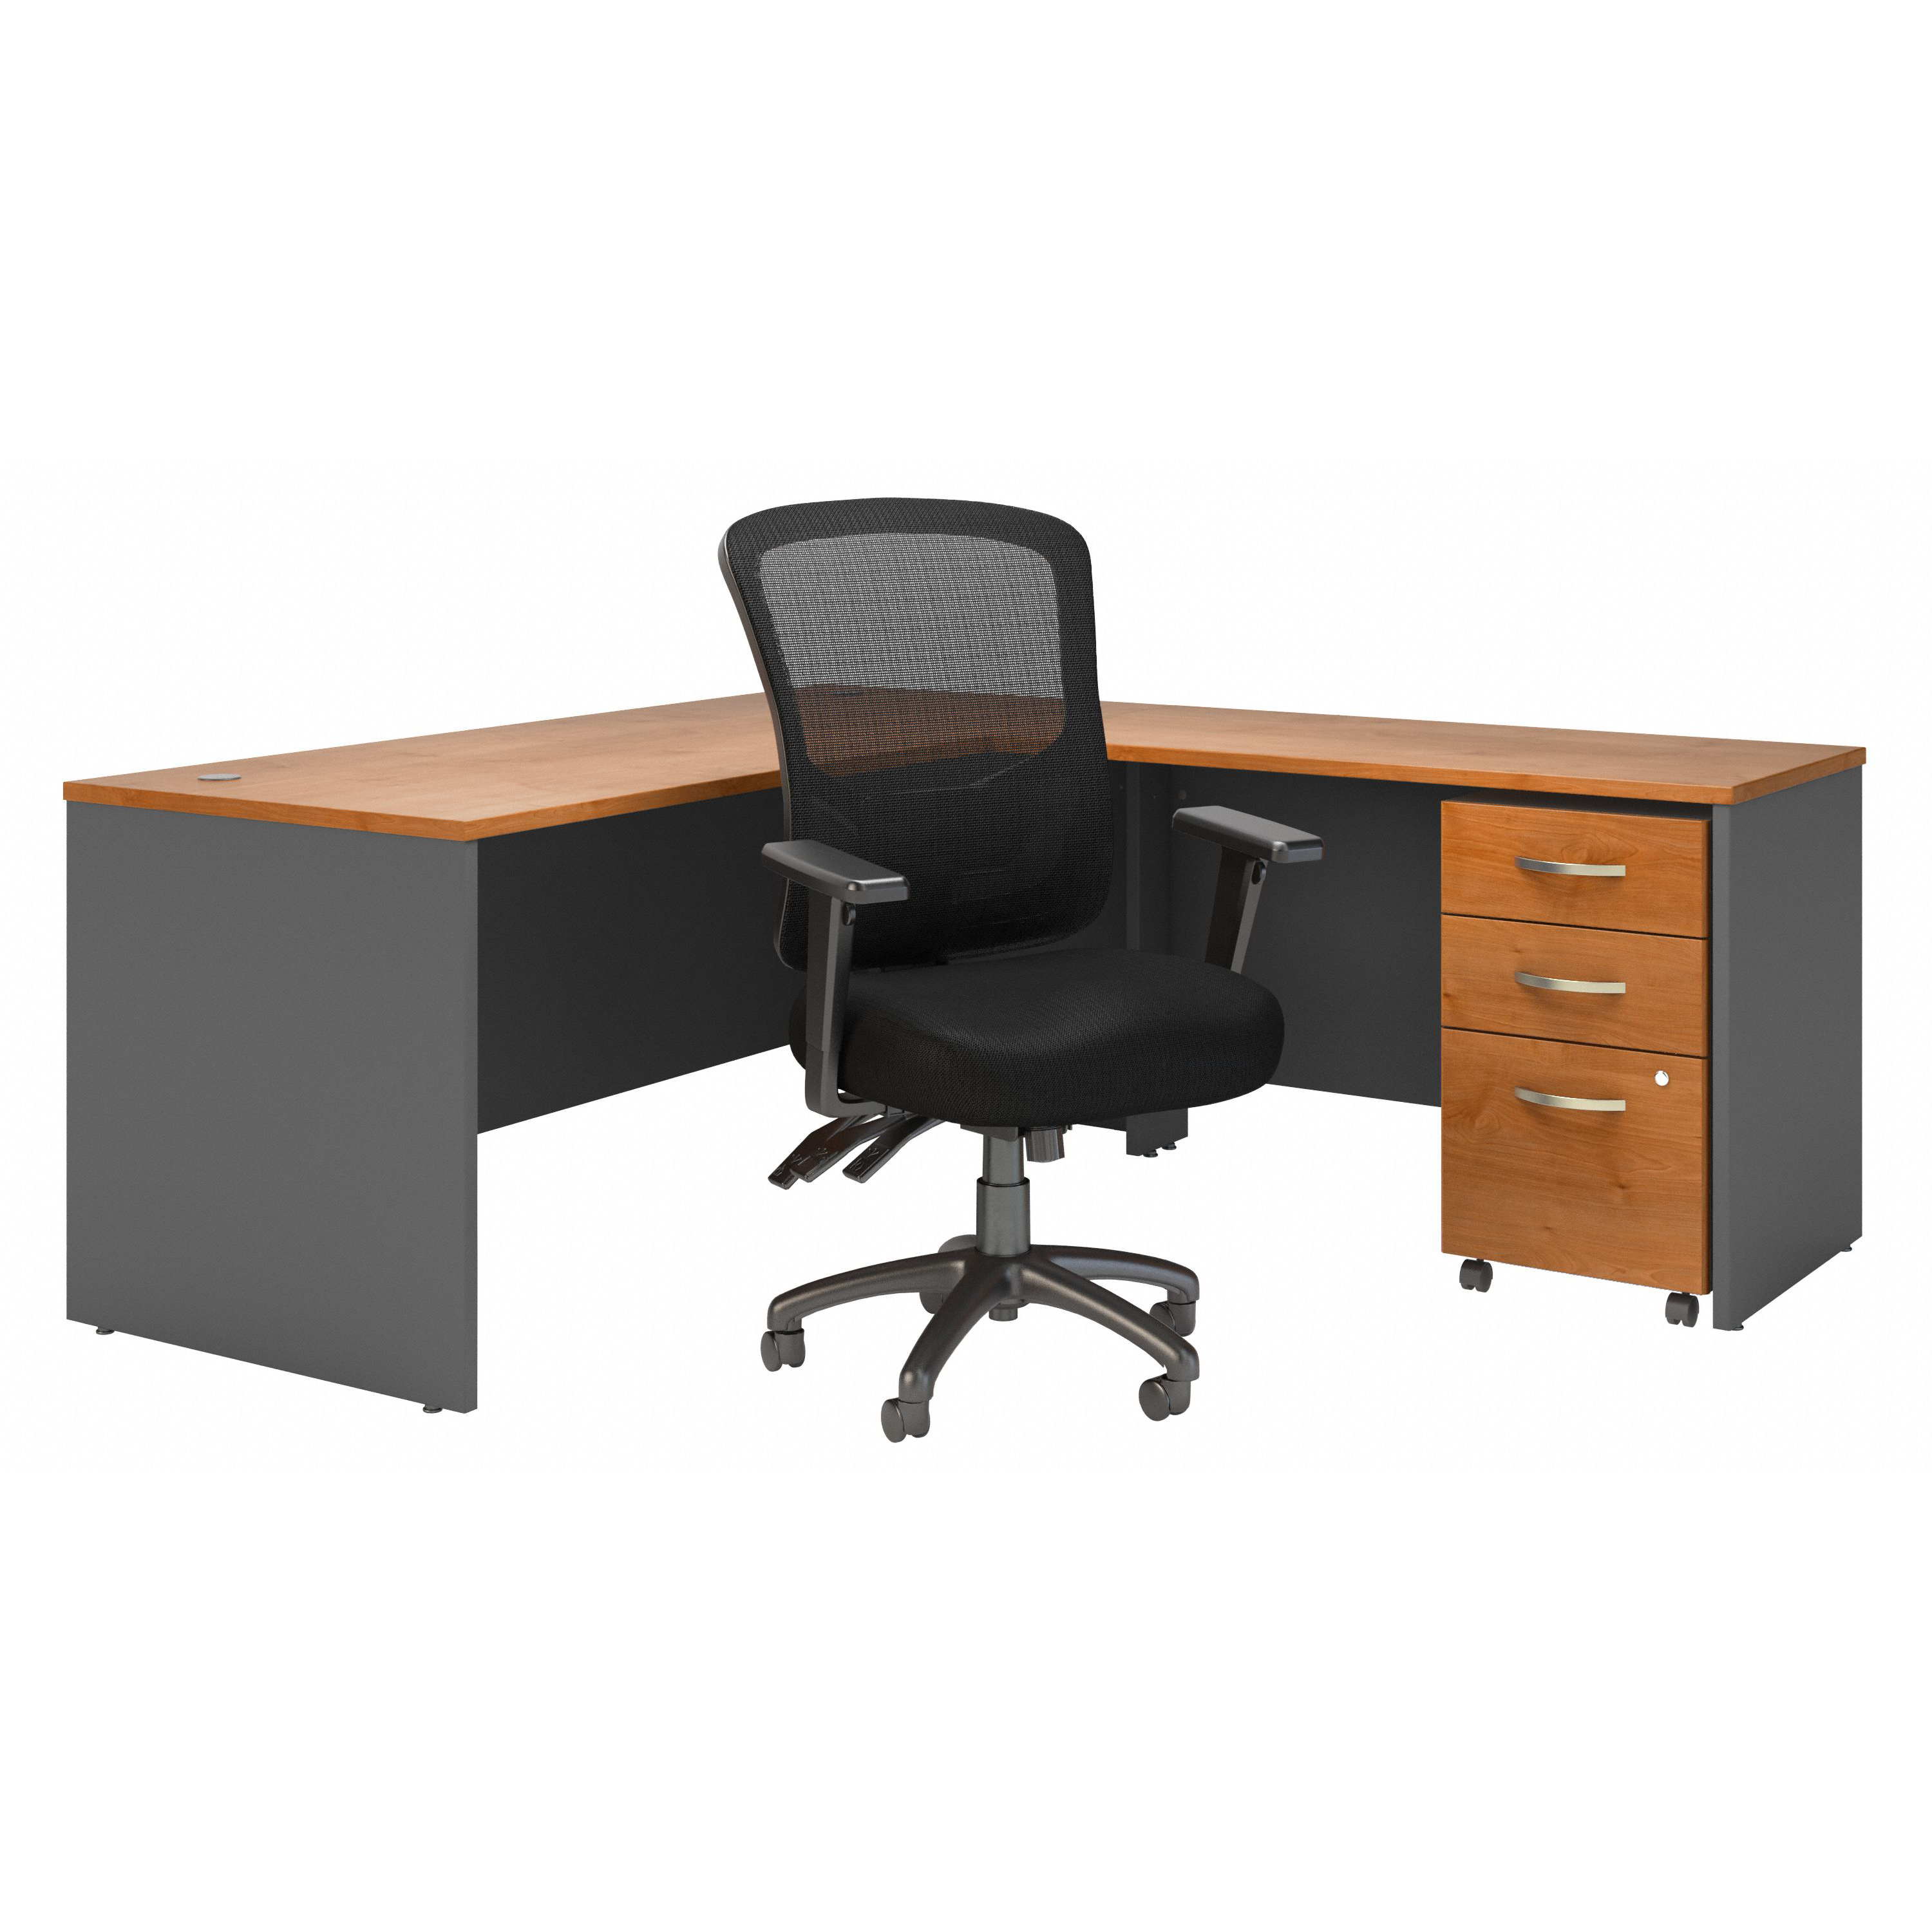 Shop Bush Business Furniture Series C 72W L Shaped Desk with Mobile File Cabinet and High Back Multifunction Office Chair 02 SRC131NCSU #color_natural cherry/graphite gray